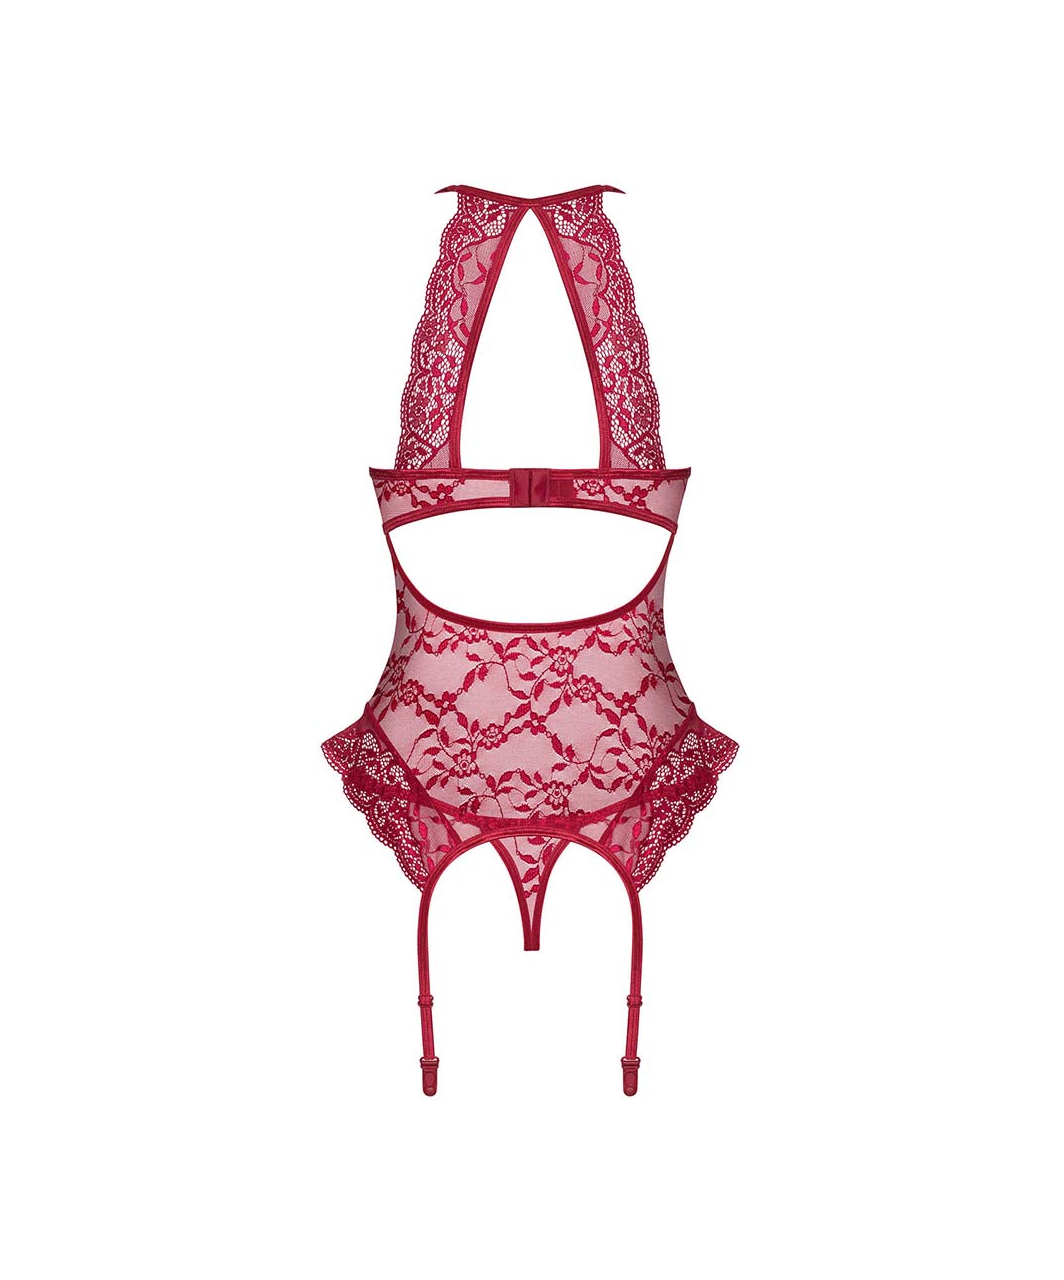 Obsessive Ivetta red lace basque with string